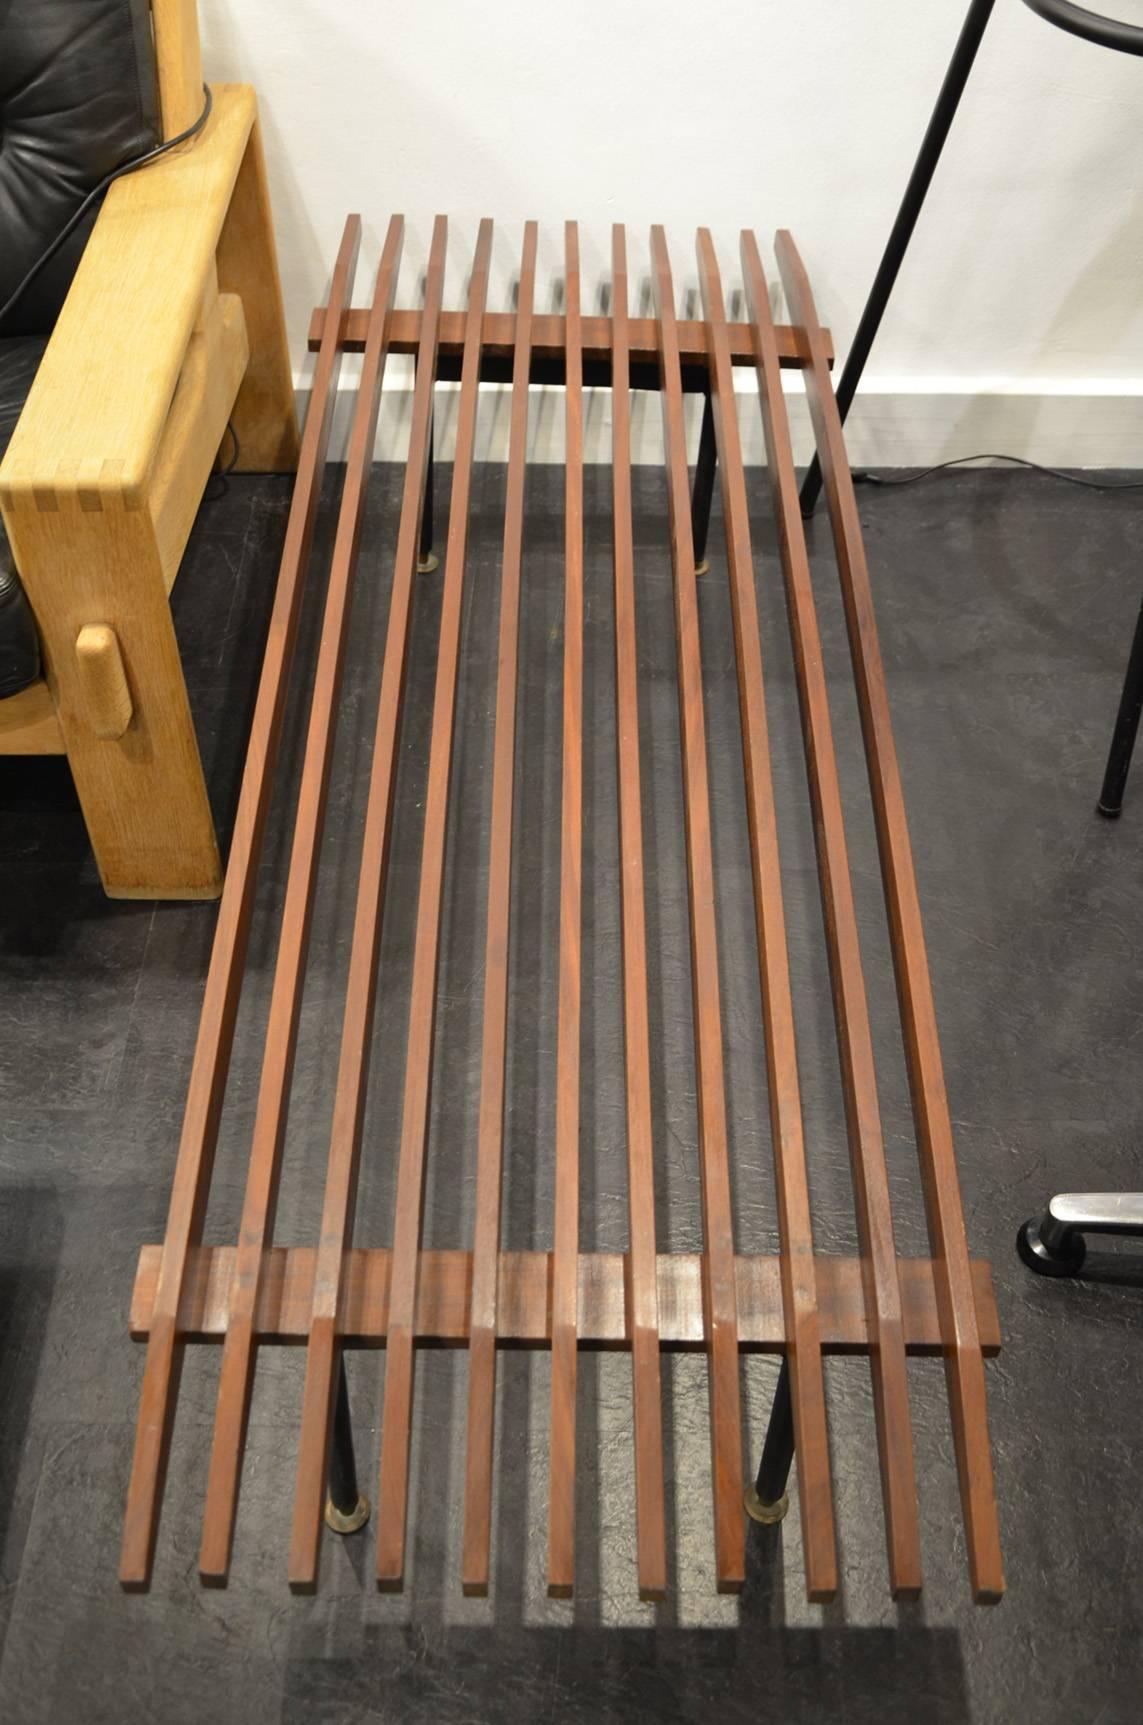 Beautiful 1960 wood and brass Italian bench.
This Italian slatted wenge bench with a black metal frame and brass details was made in the 1960s. It can also be used as a side table or coffee table.
Good vintage condition.